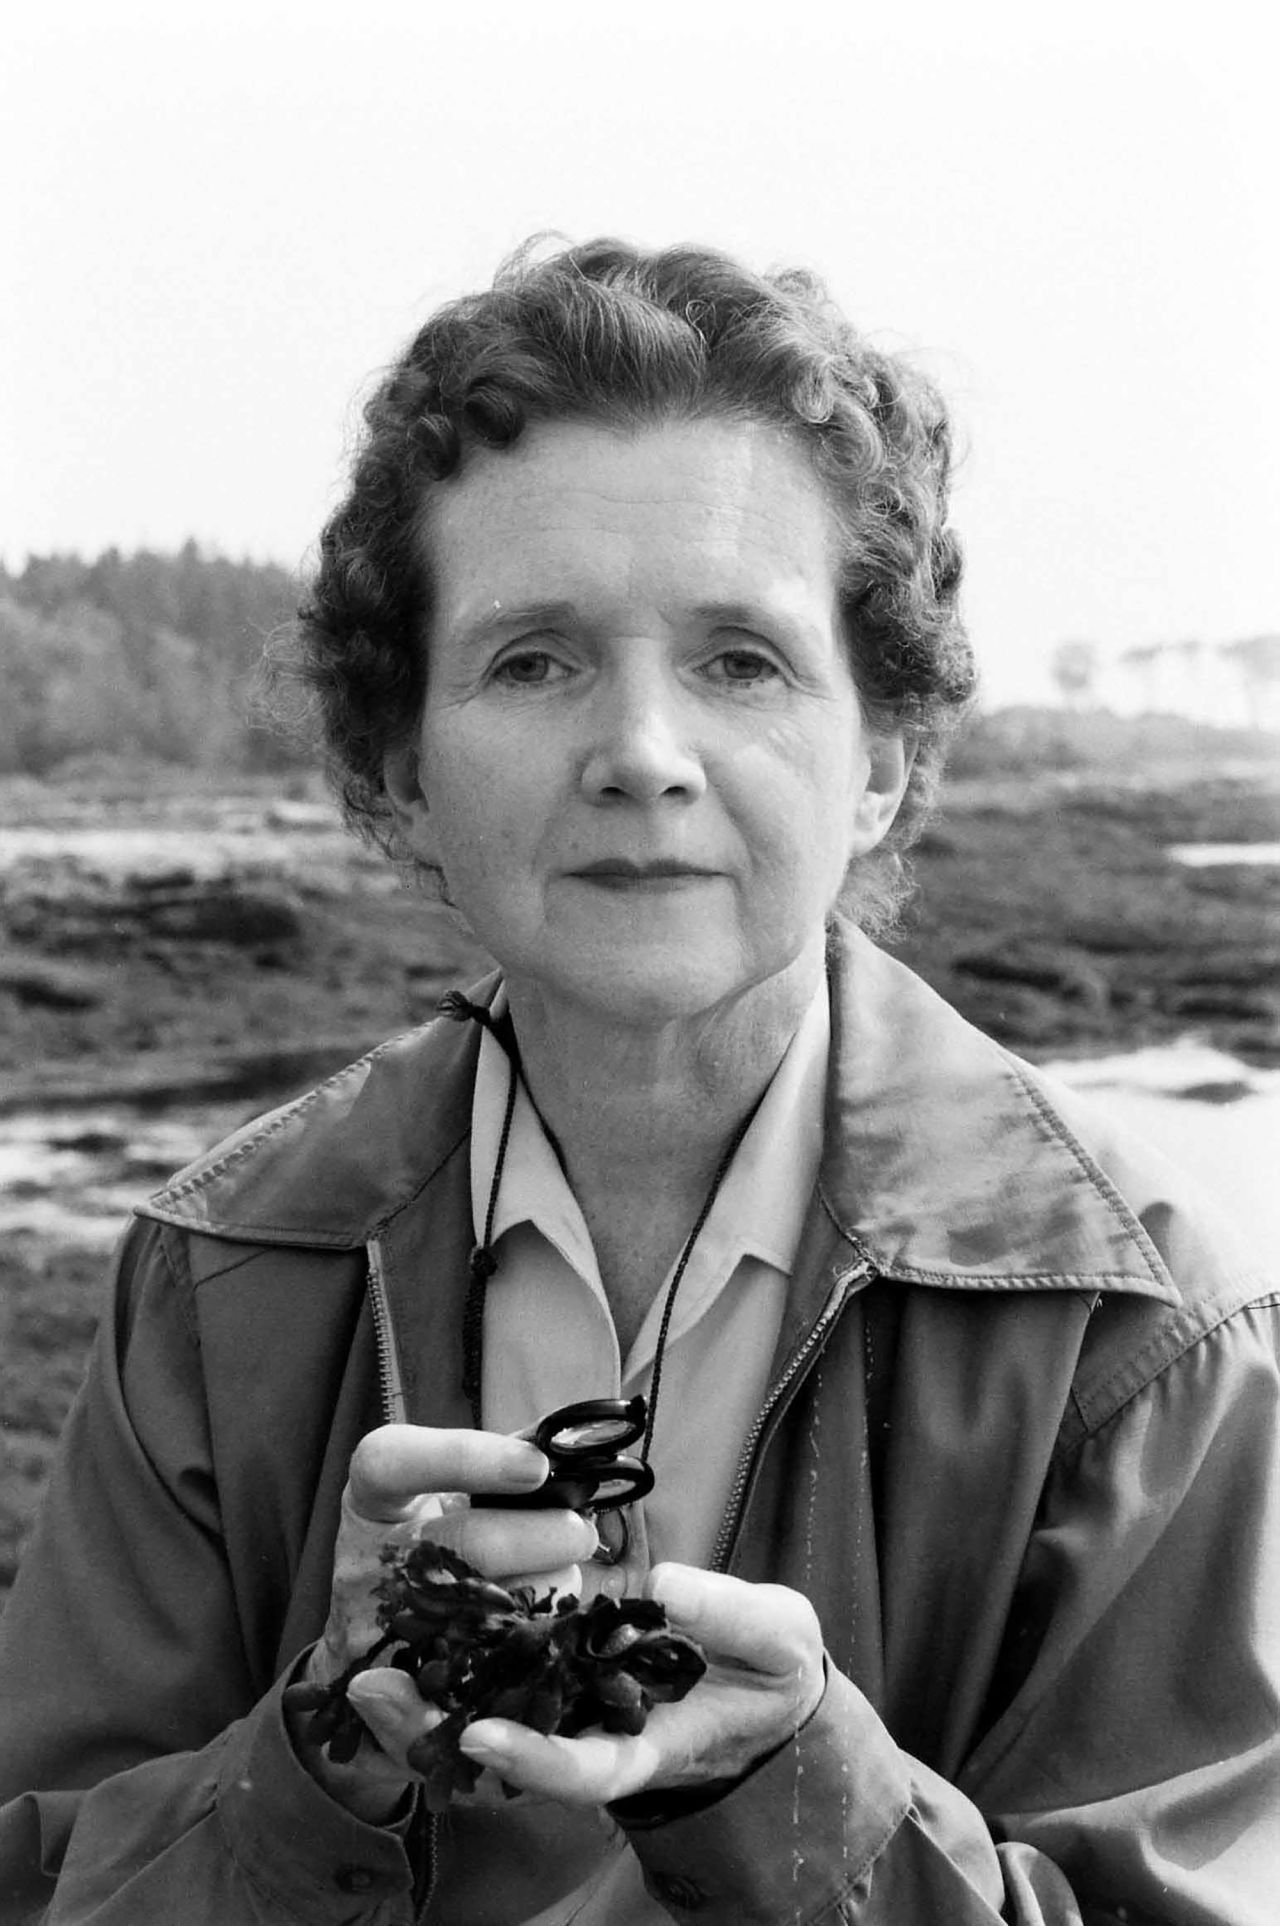 Marine biologist and author Rachel Carson became the second woman hired by the US Bureau of Fisheries in 1936. Although she published multiple books throughout her life, her groundbreaking book "Silent Spring" became a springboard for the global environmental movement. Her research on the effects of pesticides led to the ban of DDT. 